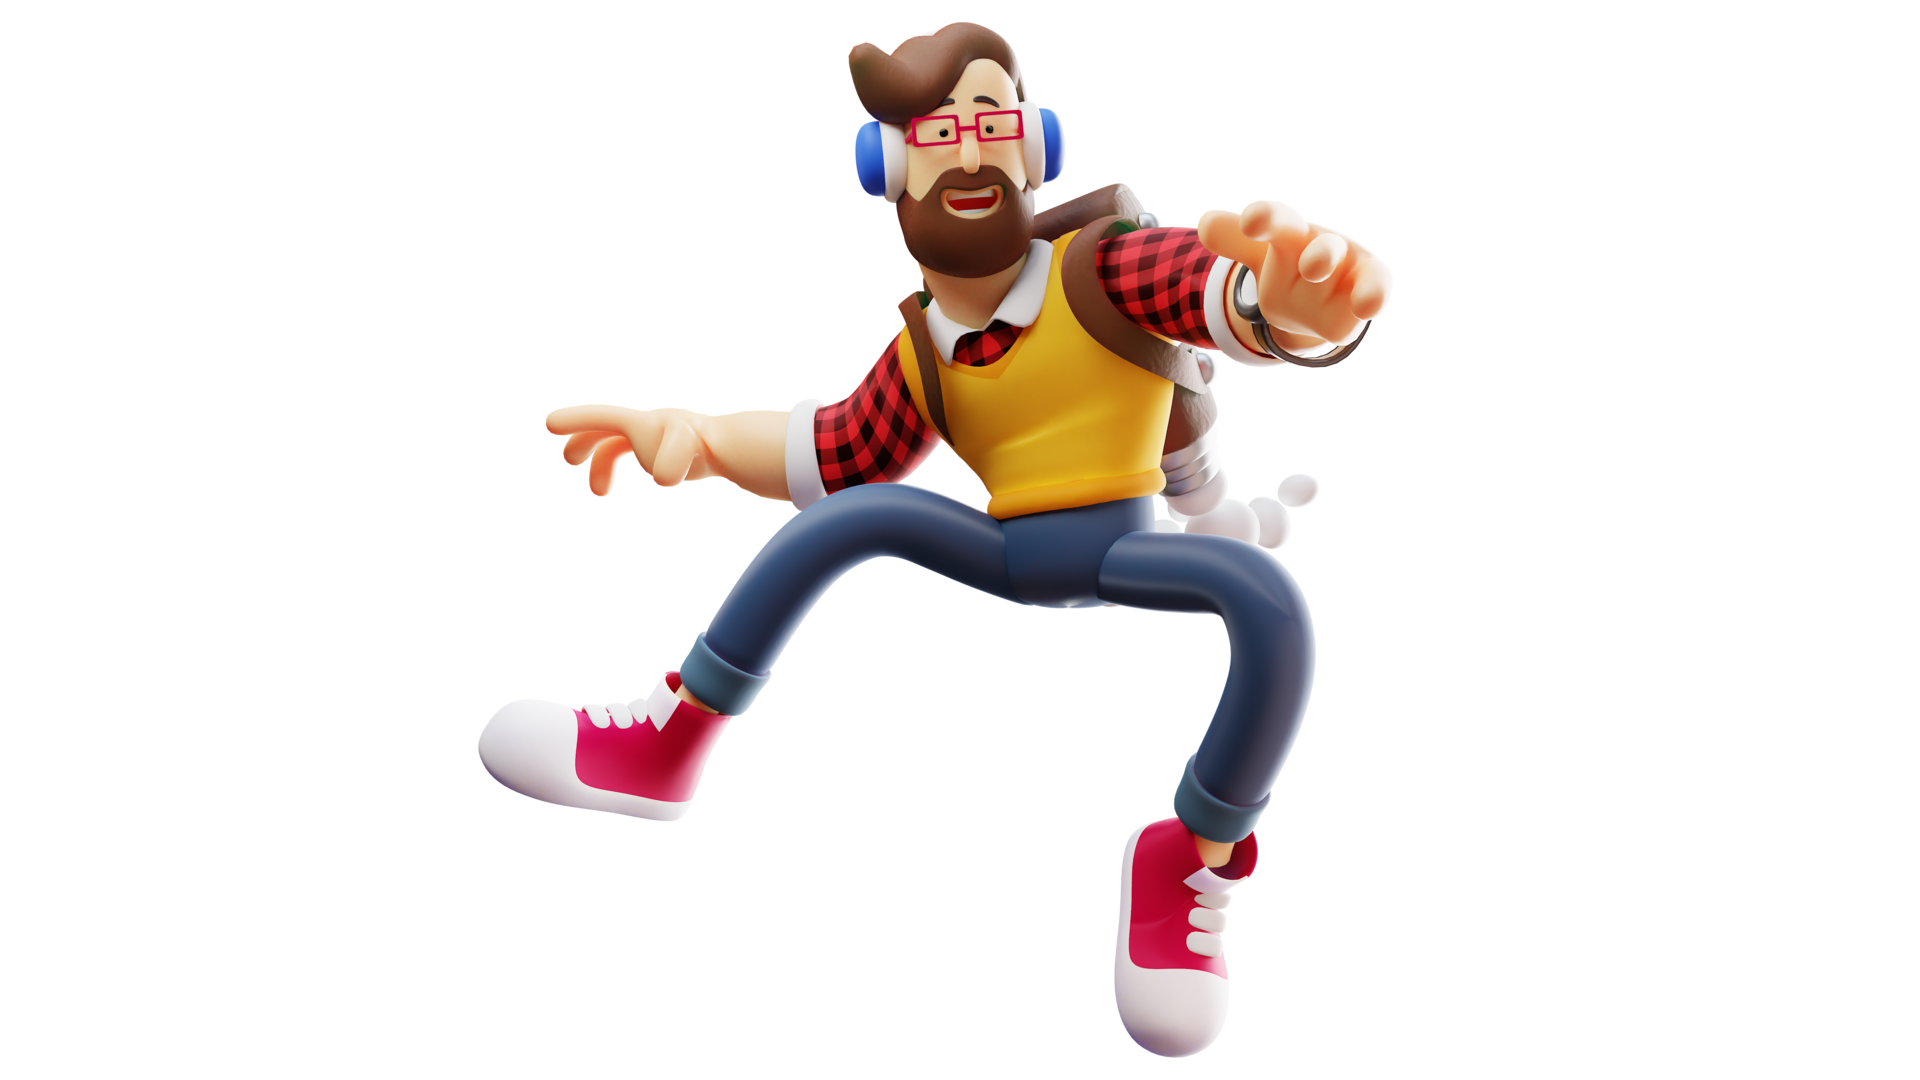 Free 3D illustration. Unique young 3D Male Cartoon Character. Cool young  man in flying pose. Cool man holding rocket bag smiling happily. 3D Cartoon  Character 17172844 PNG with Transparent Background